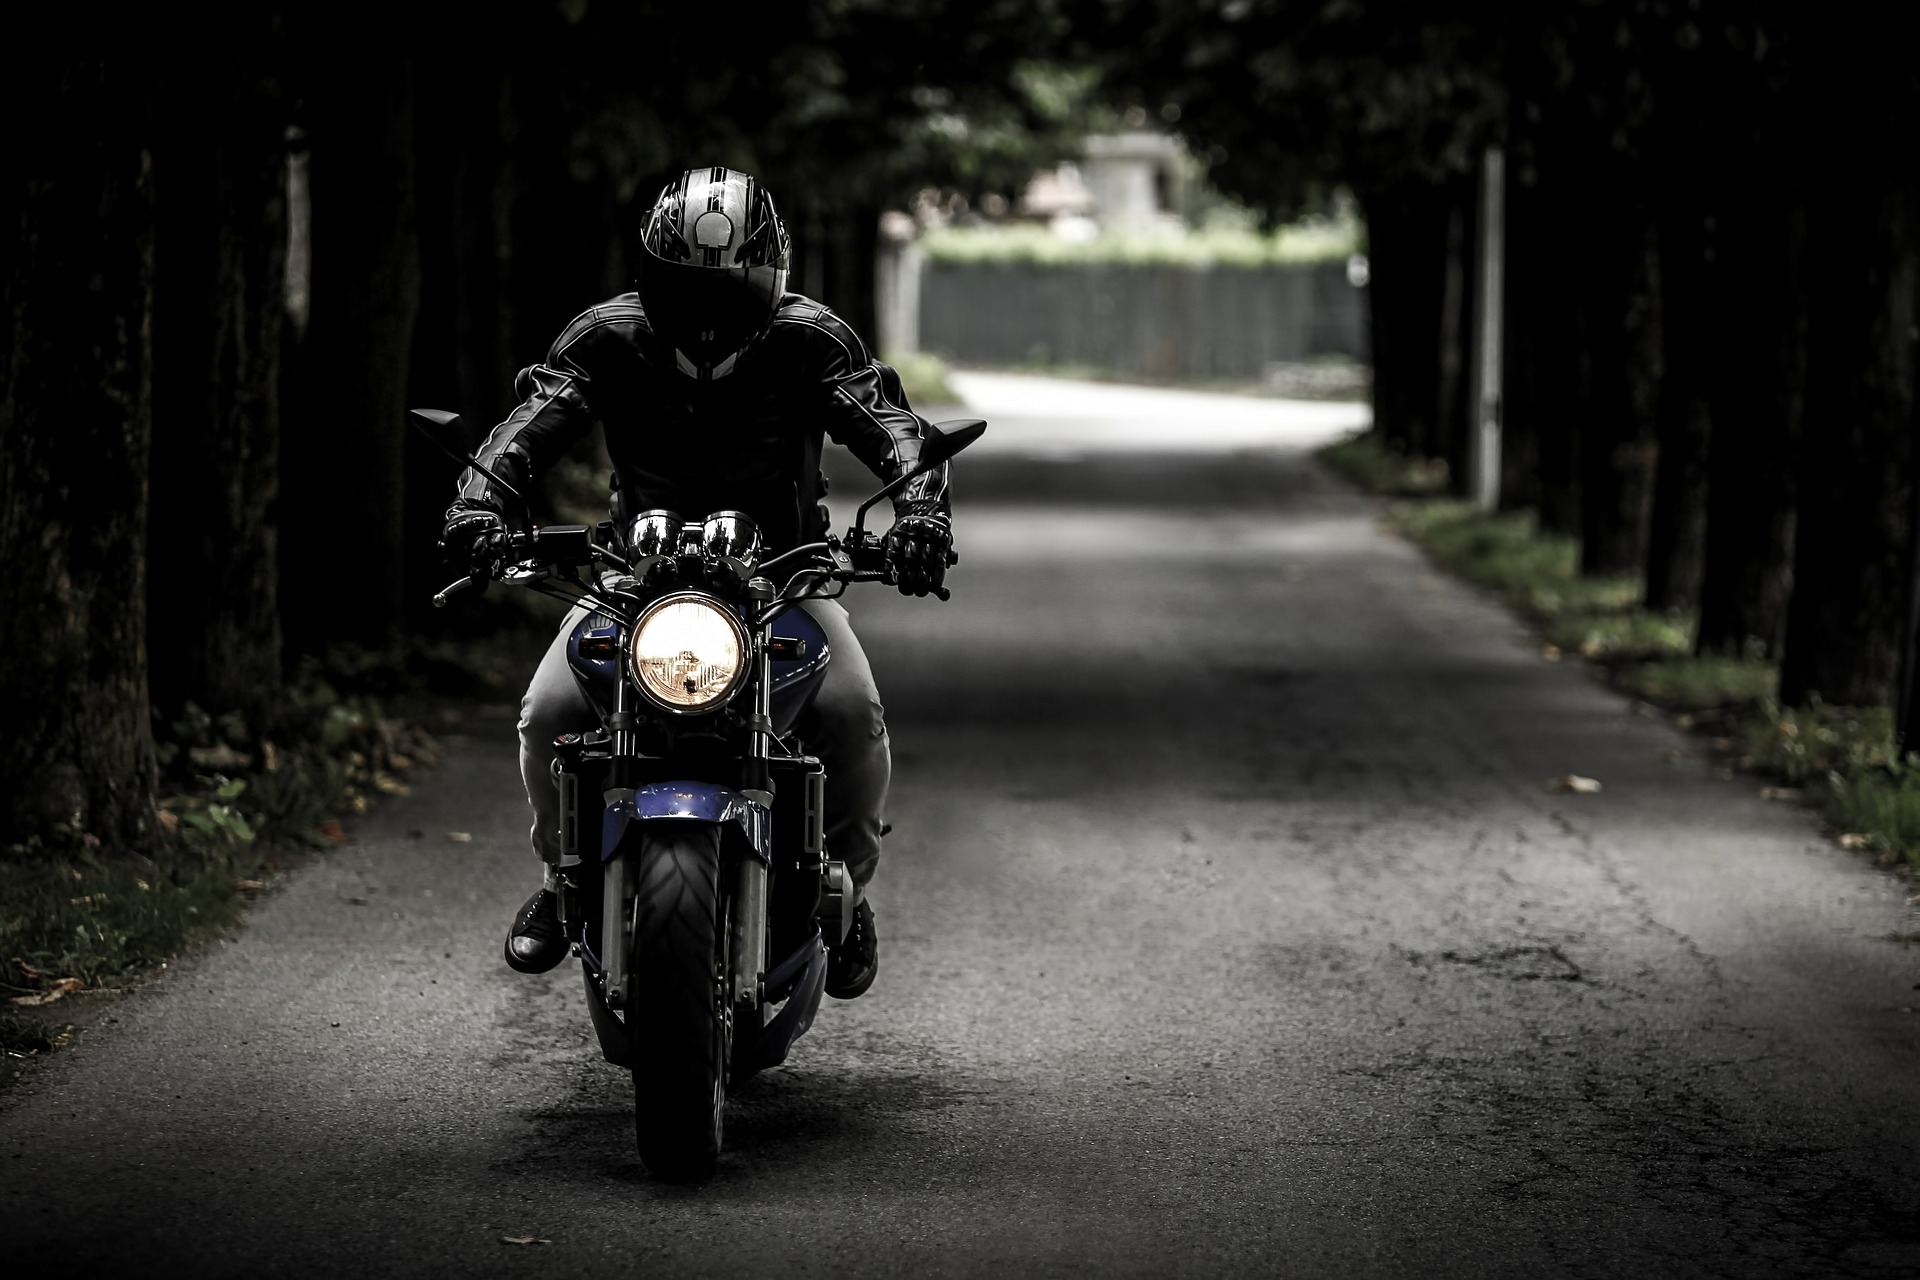 Tips for preventing motorcycle accidents